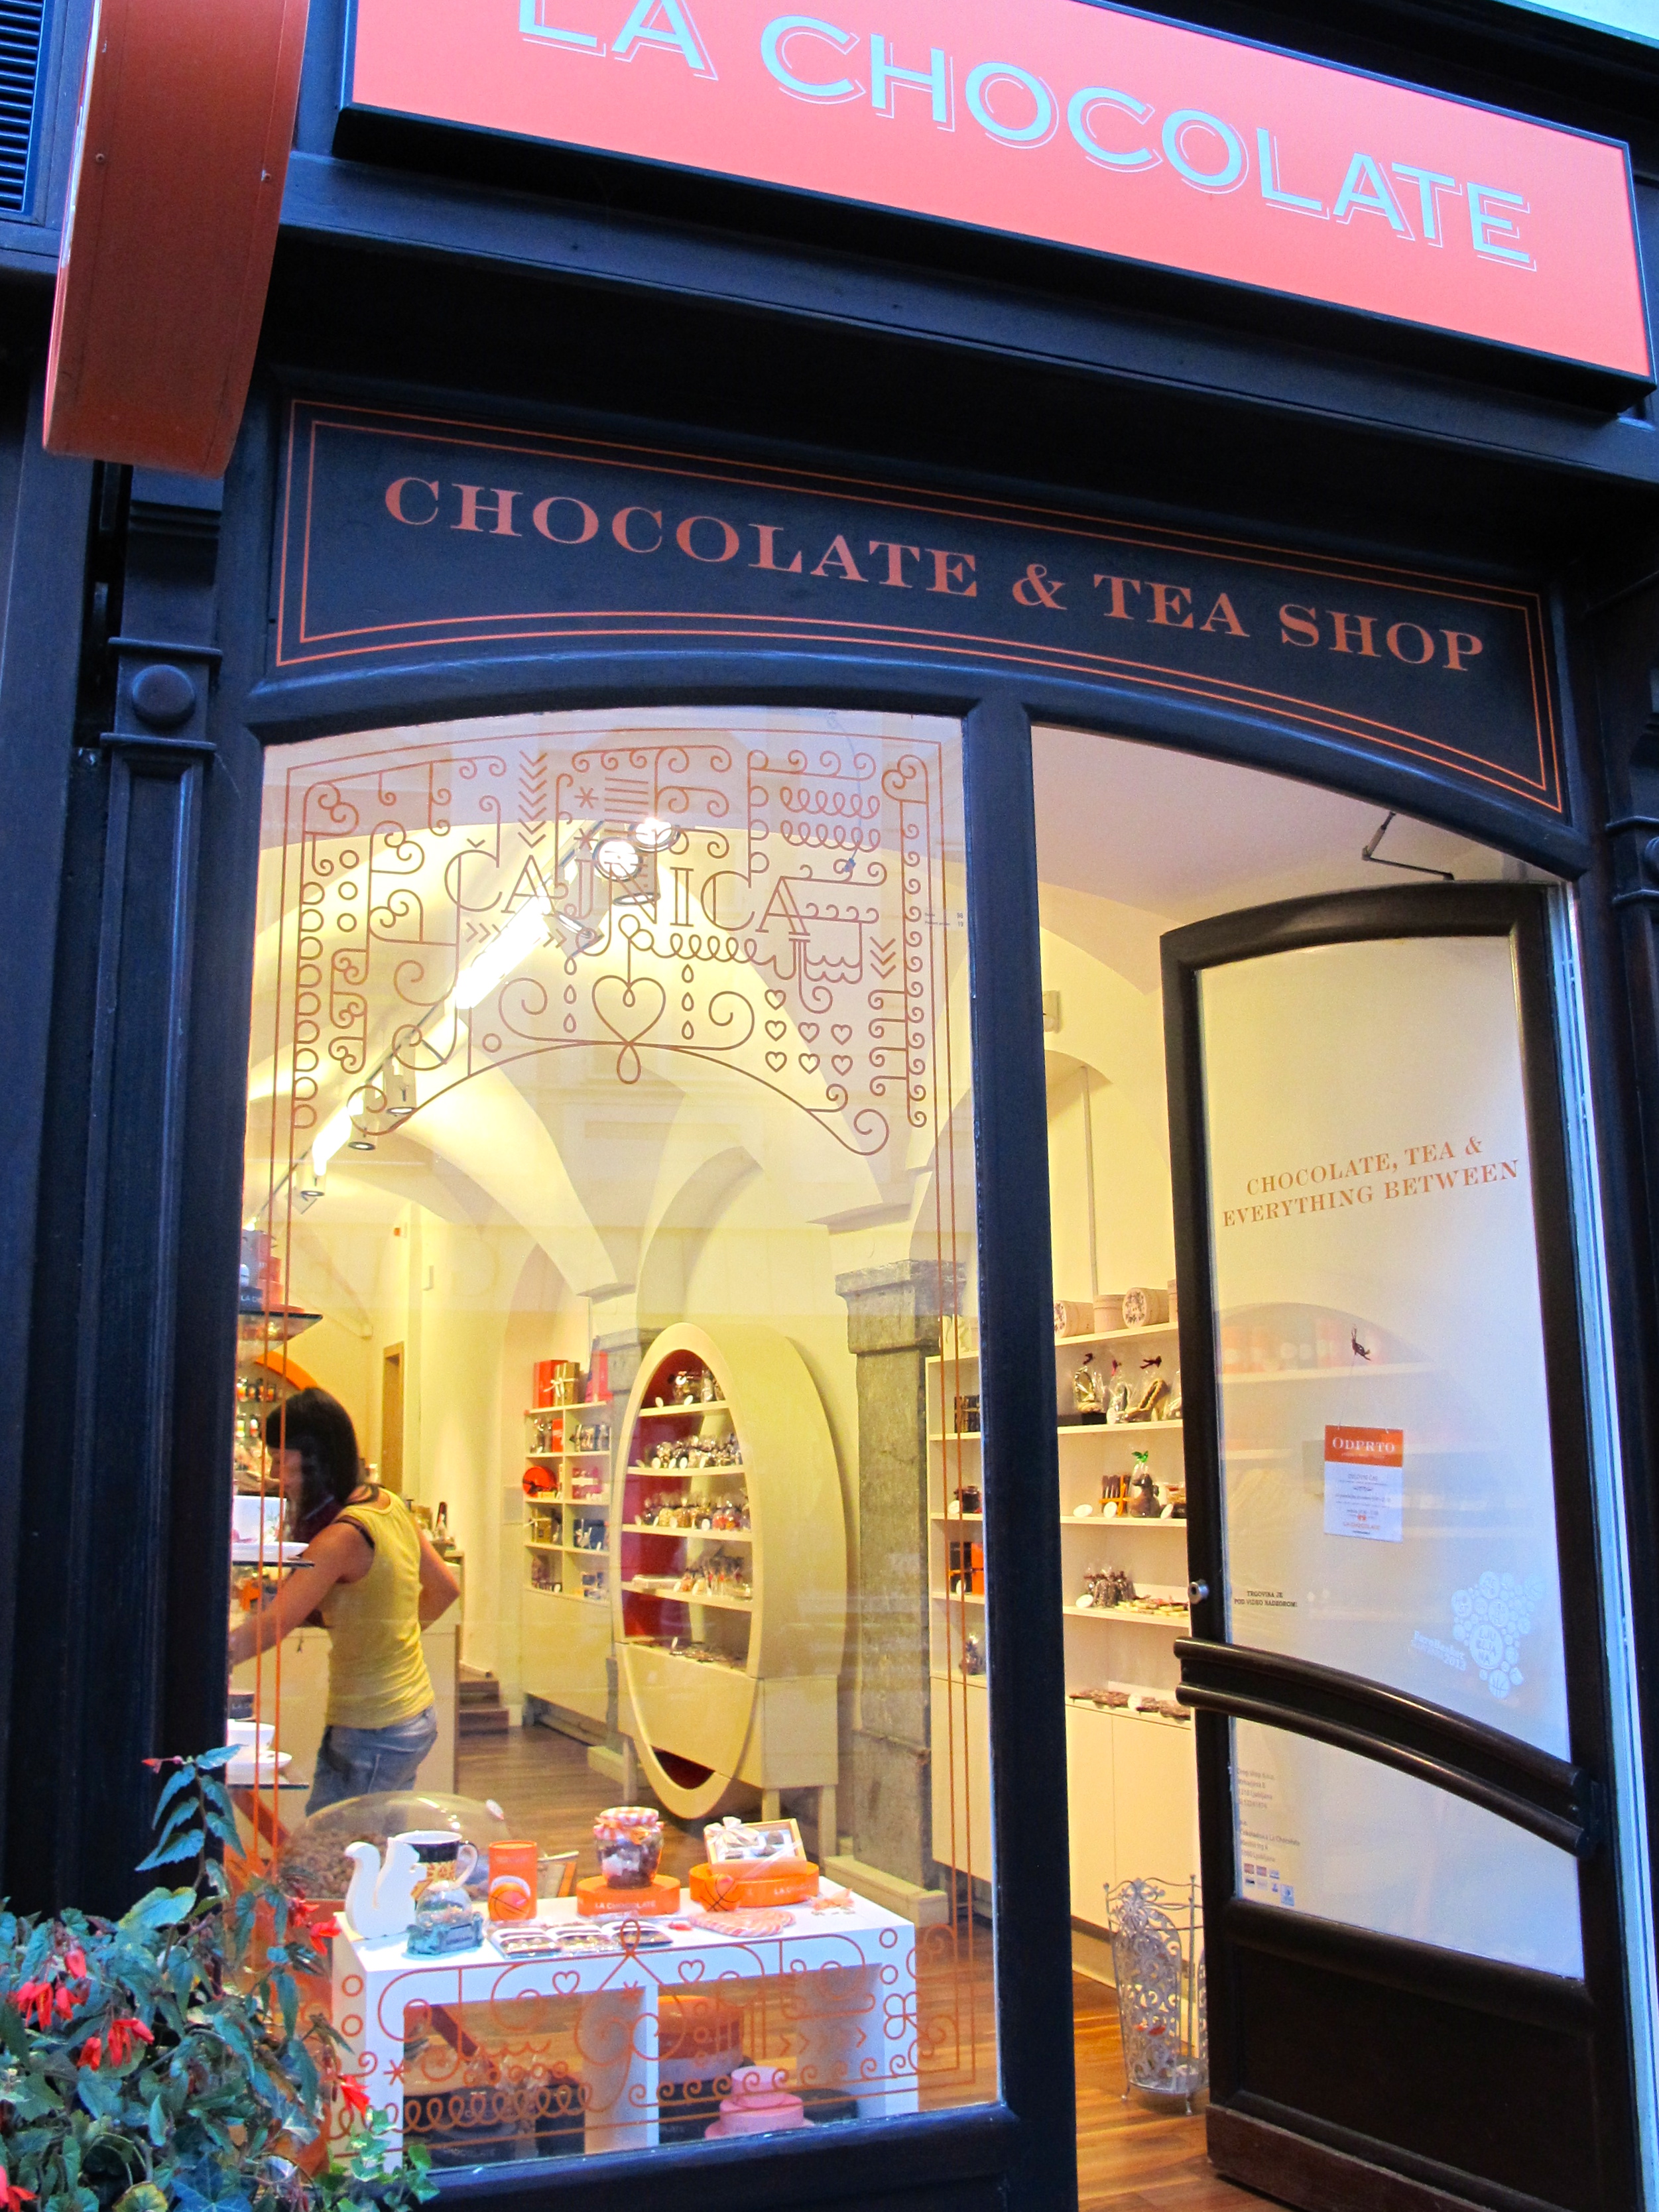 Slovenia chocolate is as inticing as the pretty shops showcasing the treats. Photo by Marla Norman.